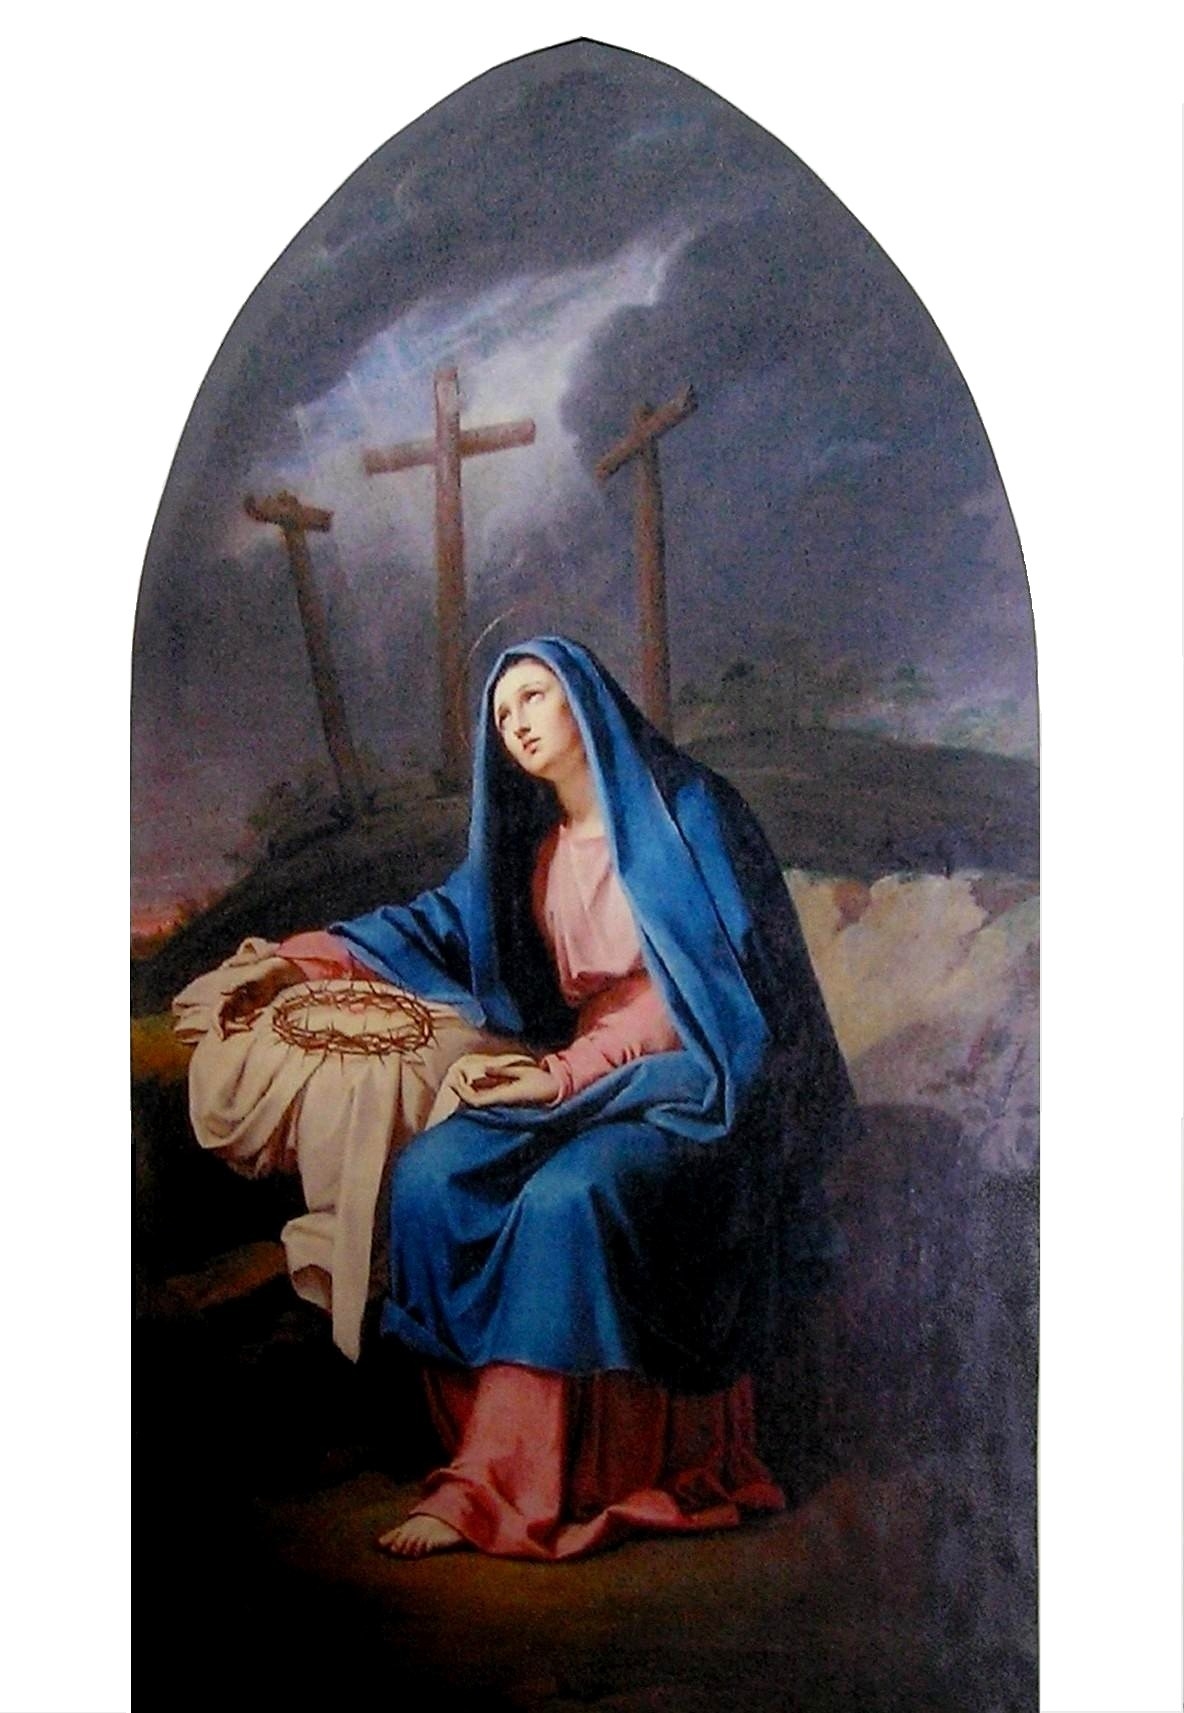 Our Lady of Sorrows in the Society | RSCJ.org